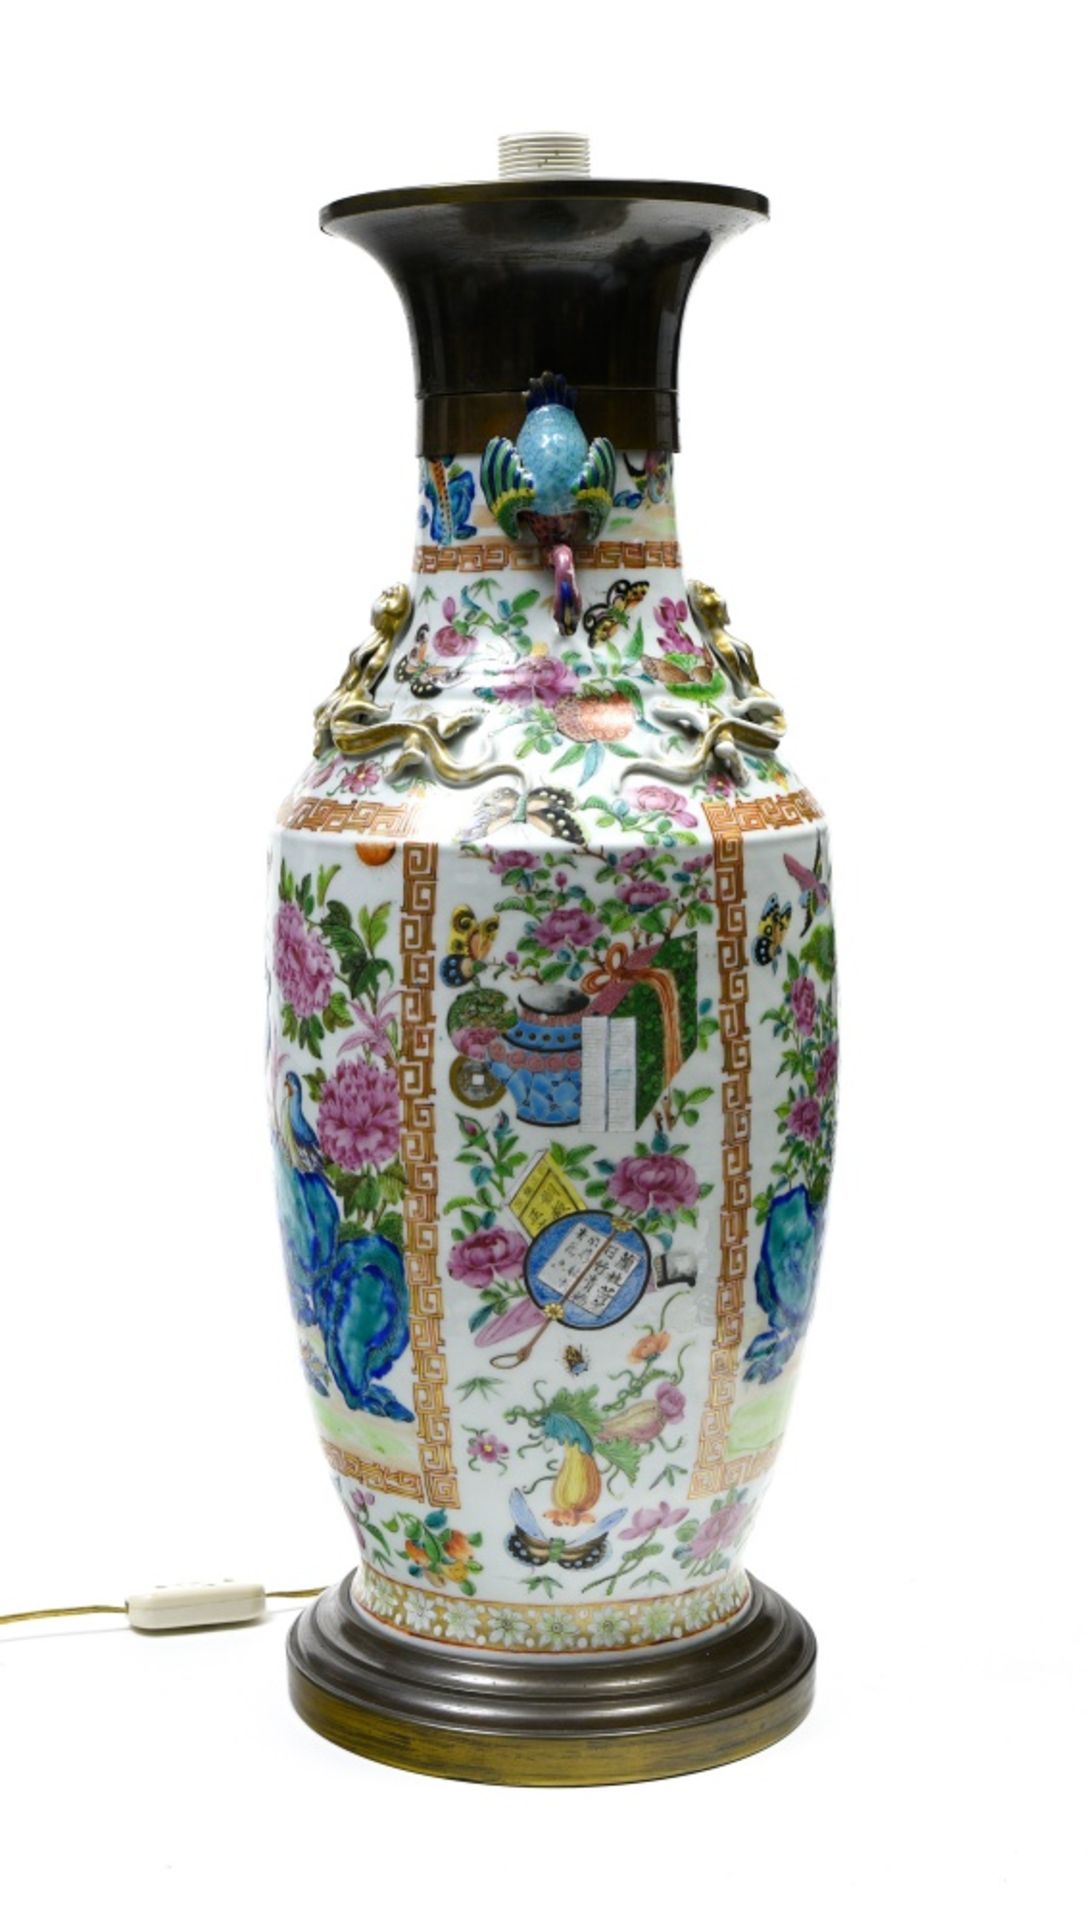 China, 19th century Large Famille Rose vase converted to lamp, Famille Rose porcelain, decorated - Image 4 of 4